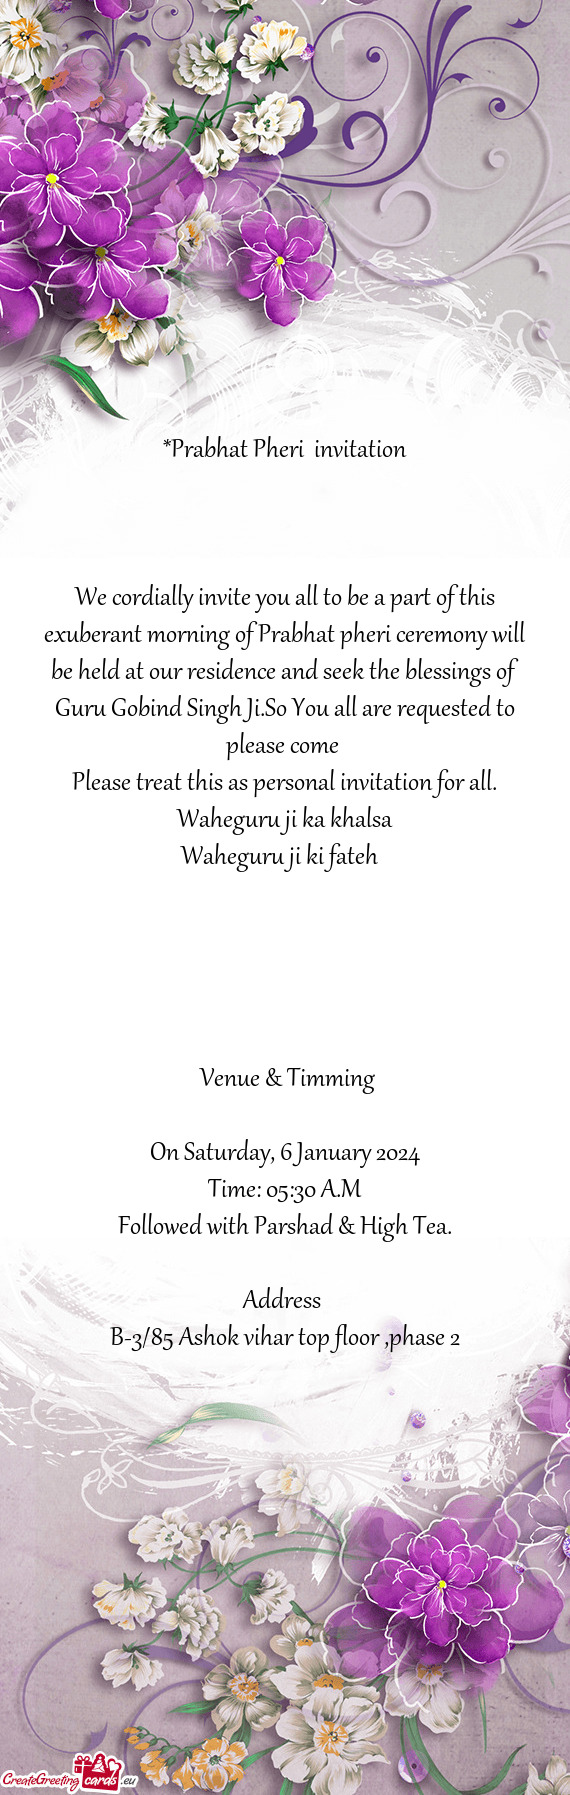 We cordially invite you all to be a part of this exuberant morning of Prabhat pheri ceremony will be